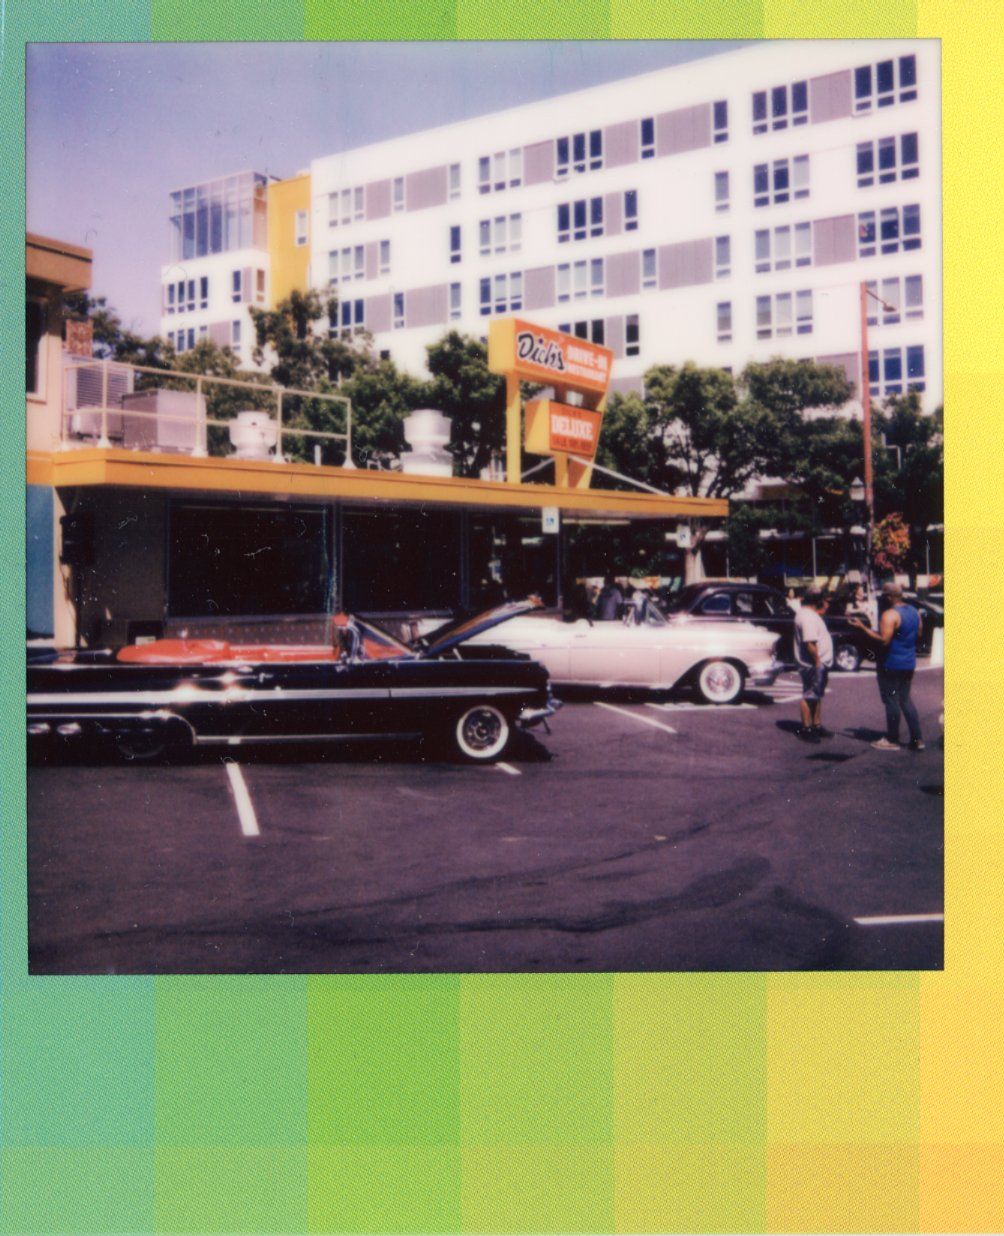 A Polaroid photo of some classic cars outside Dick's Drive-In for their 10 year anniversary, Capitol Hill, Seattle, July 2022.